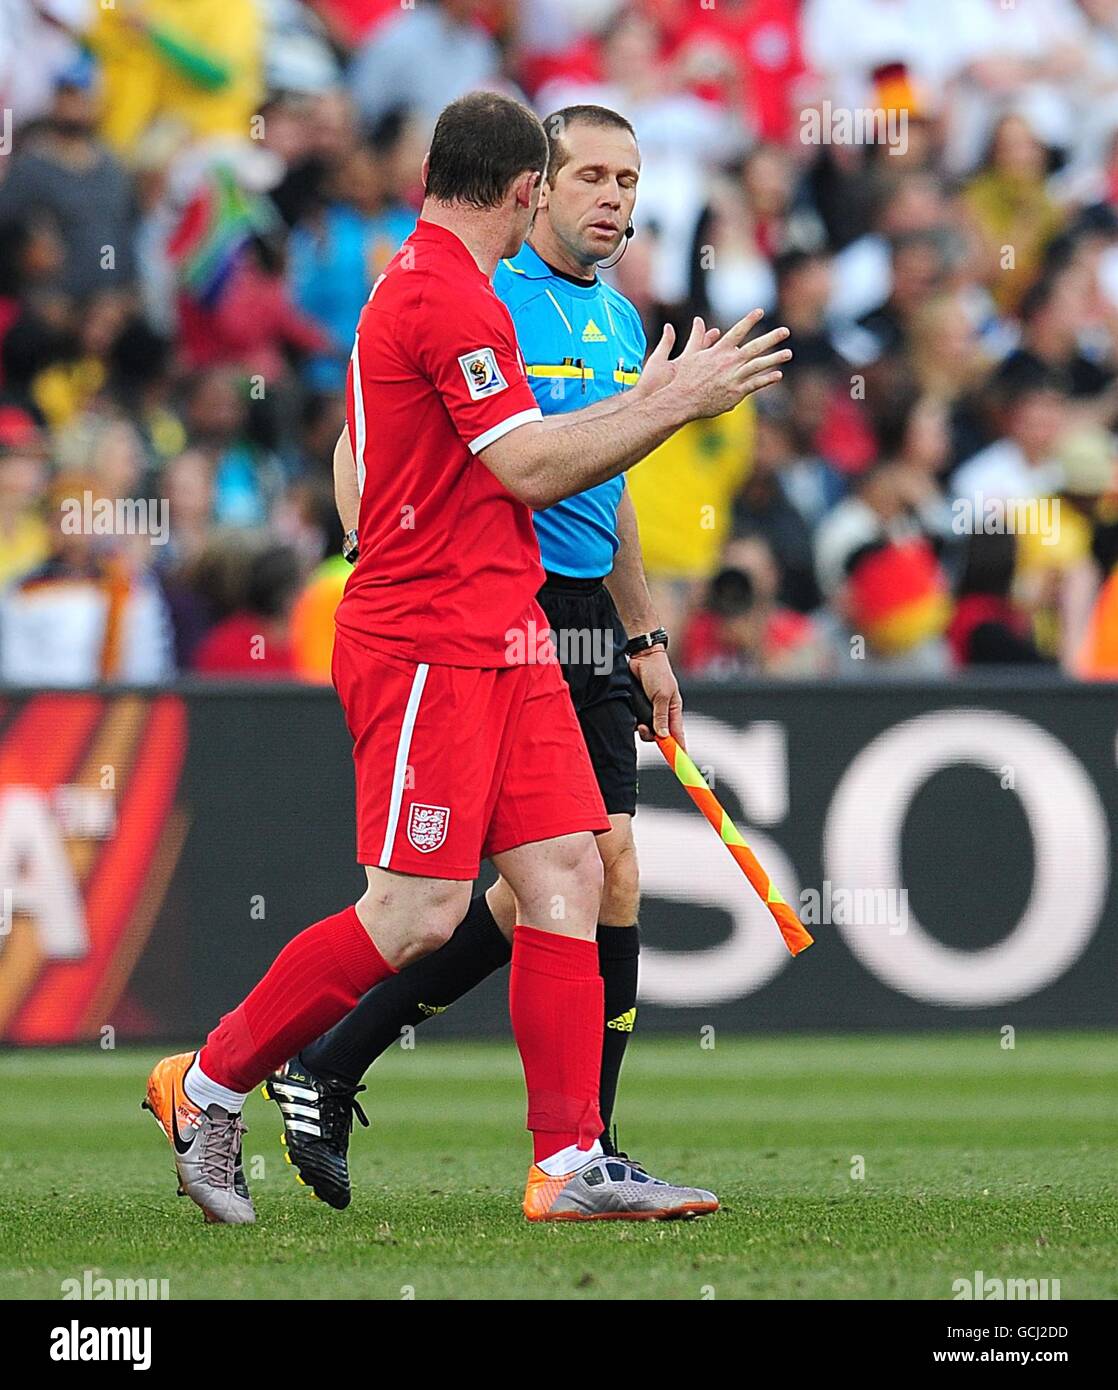 England's Wayne Rooney confronts the linesman Mauricio Espinosa as they go off for half time after not giving an England goal Stock Photo